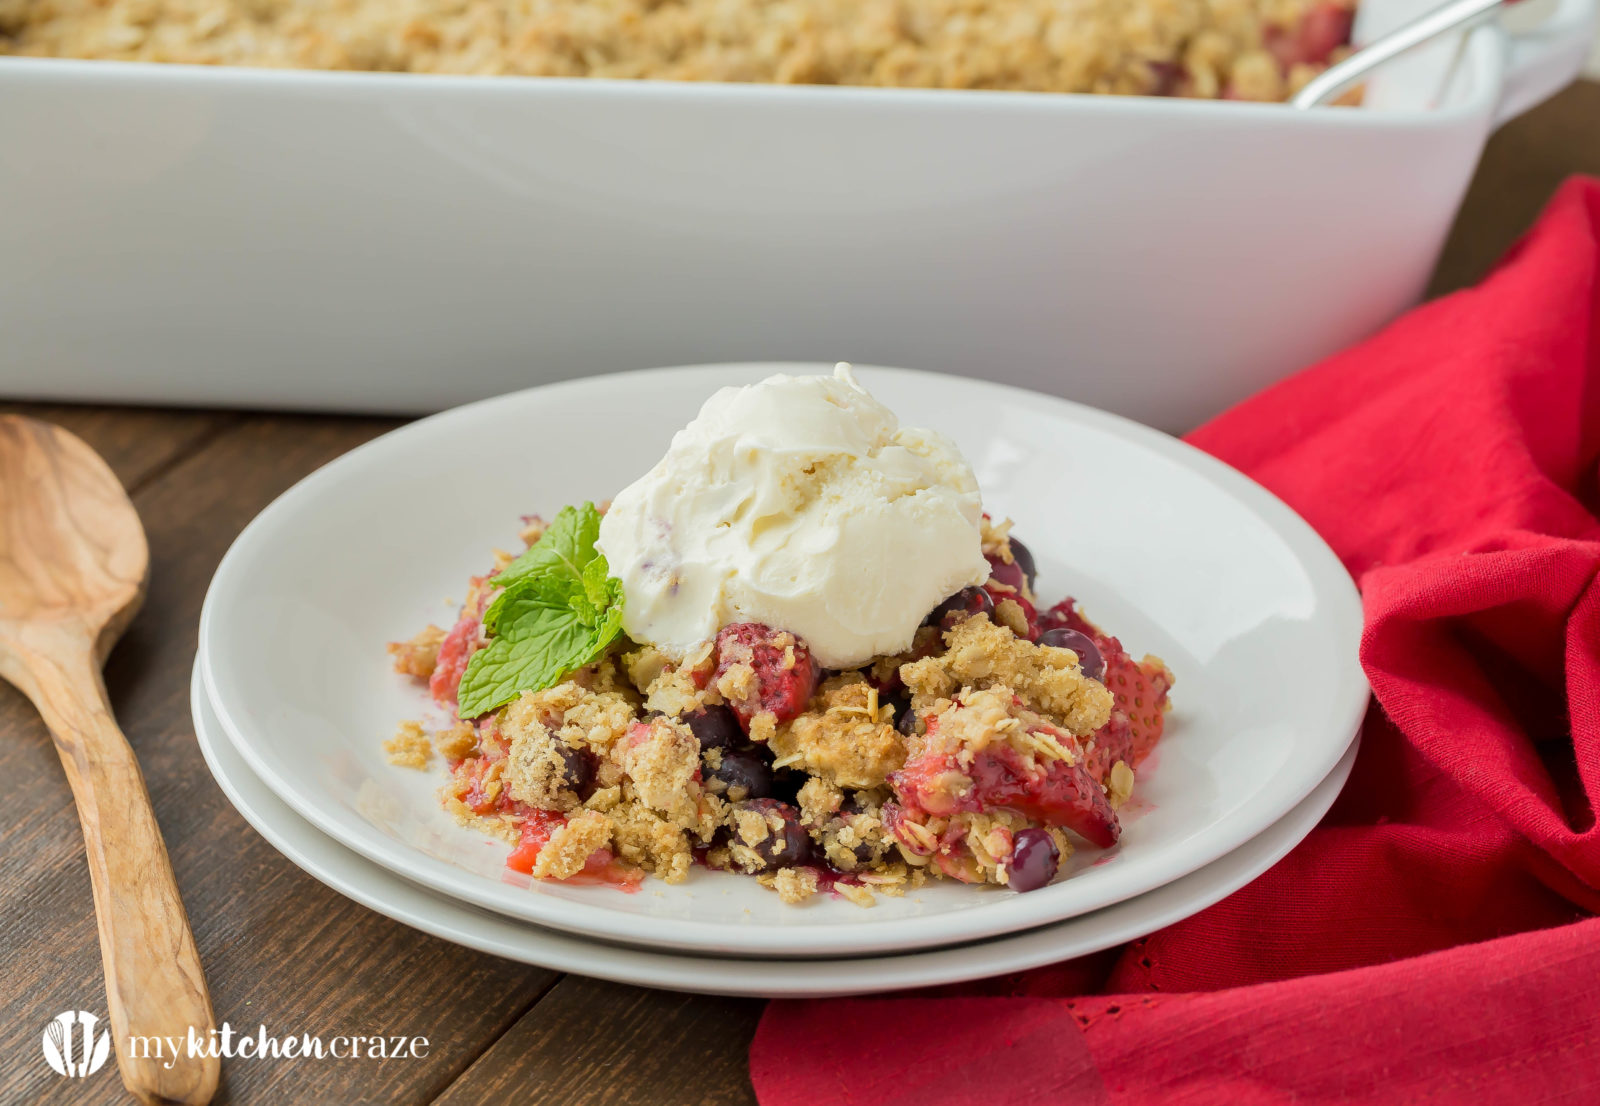 Warm mixed berries topped with crispy oats, make this Triple Berry Crisp a delicious fruit dessert! Serve it with a big scoop of vanilla ice cream or all by its self. It's delicious and a must have this season!